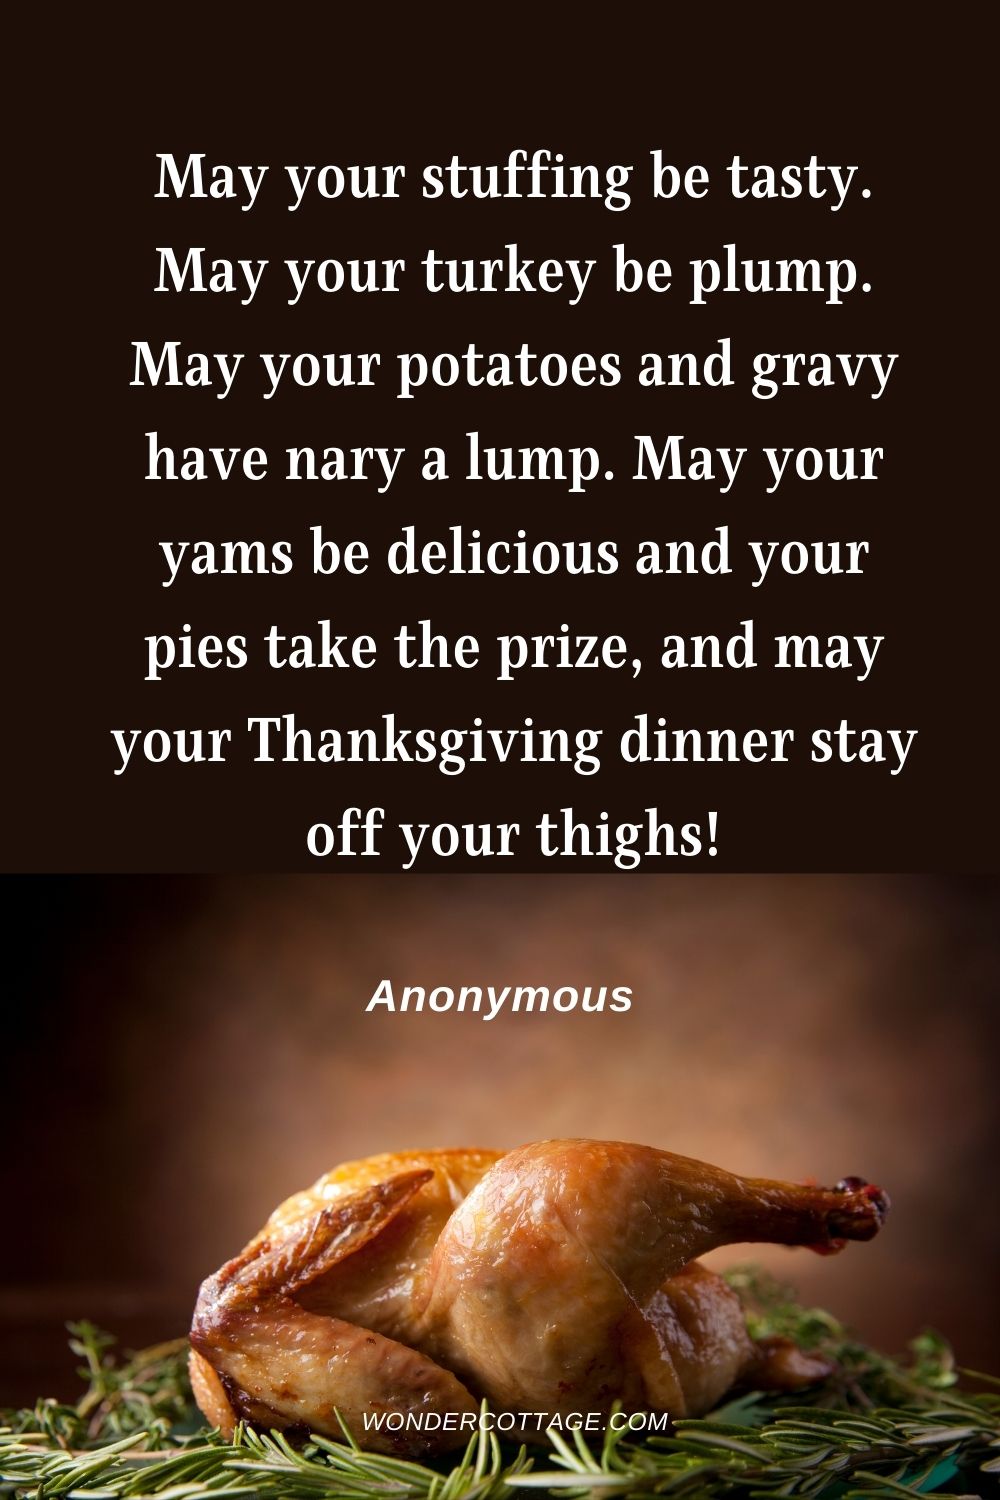 May your stuffing be tasty. May your turkey be plump. May your potatoes and gravy have nary a lump. May your yams be delicious and your pies take the prize, and may your Thanksgiving dinner stay off your thighs! Anonymous.